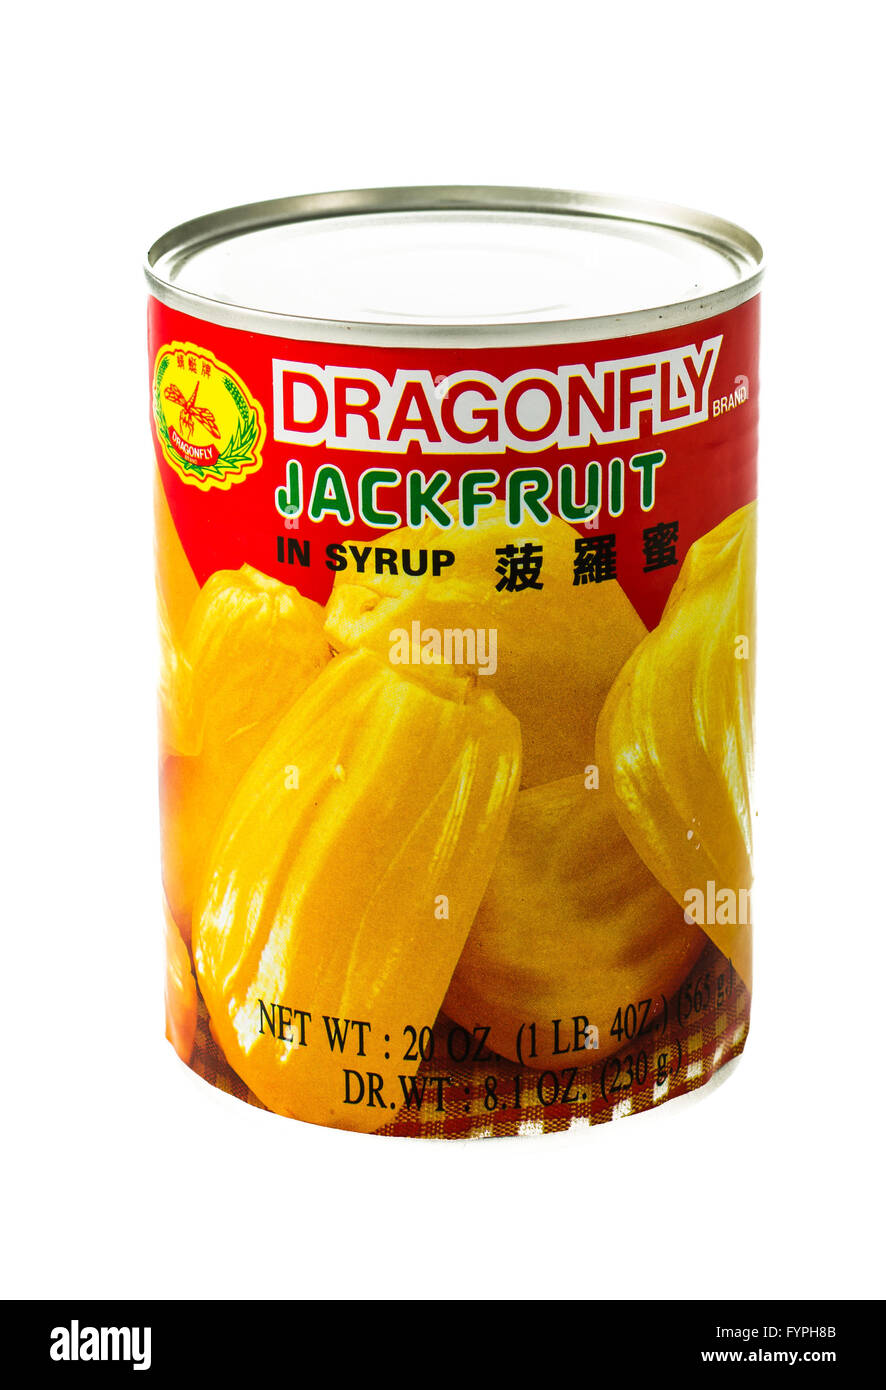 Winneconne, WI - 5 February 2015: Can of  Jackfruit in syrup imported by the Dragonfly Brand. Stock Photo